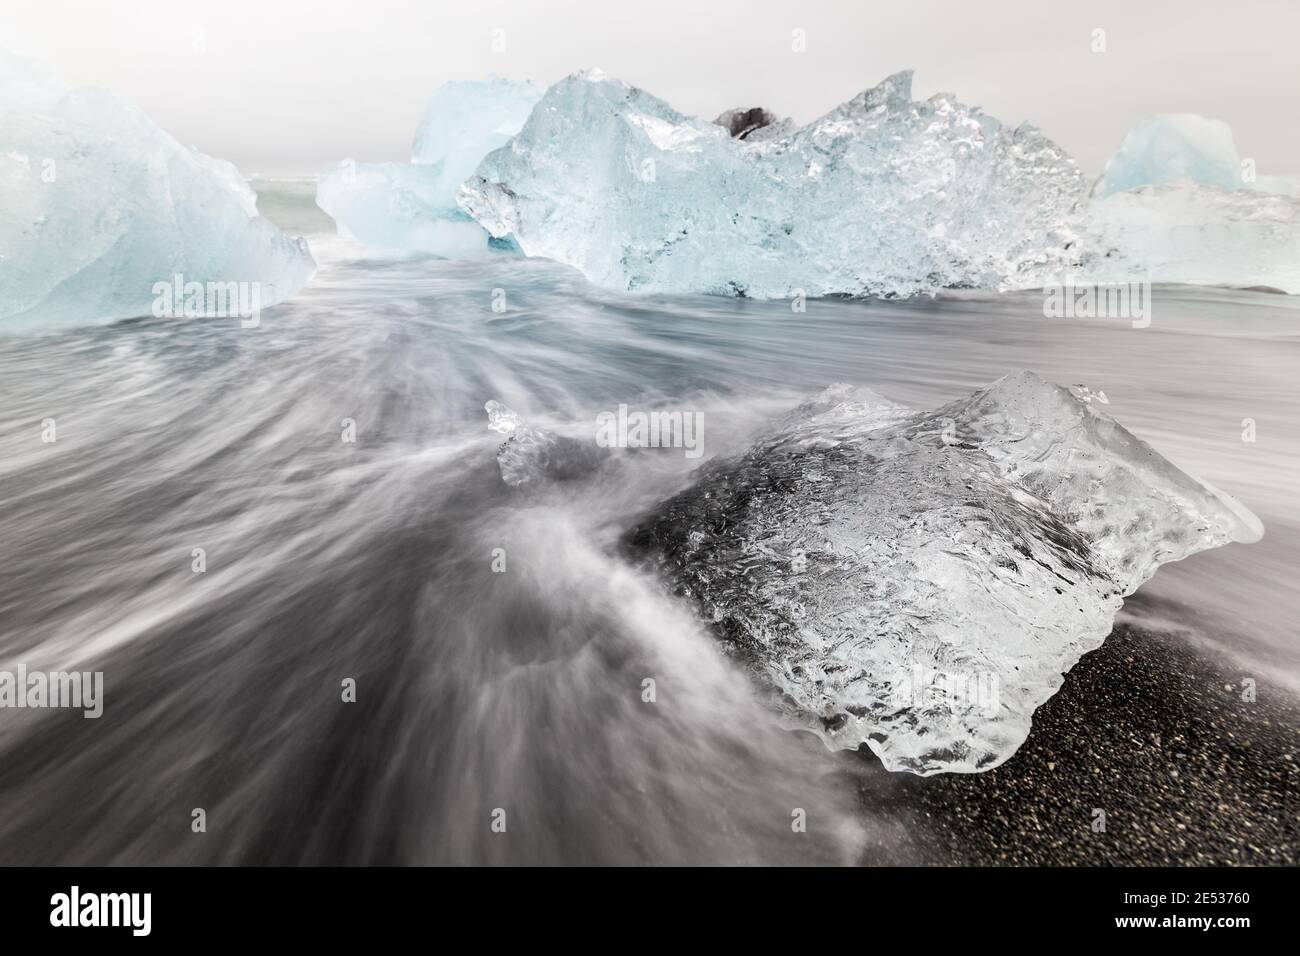 Close up shot of block of ice melting on a black shore with water ebbing and flowing, and light blue icebergs in the background Stock Photo